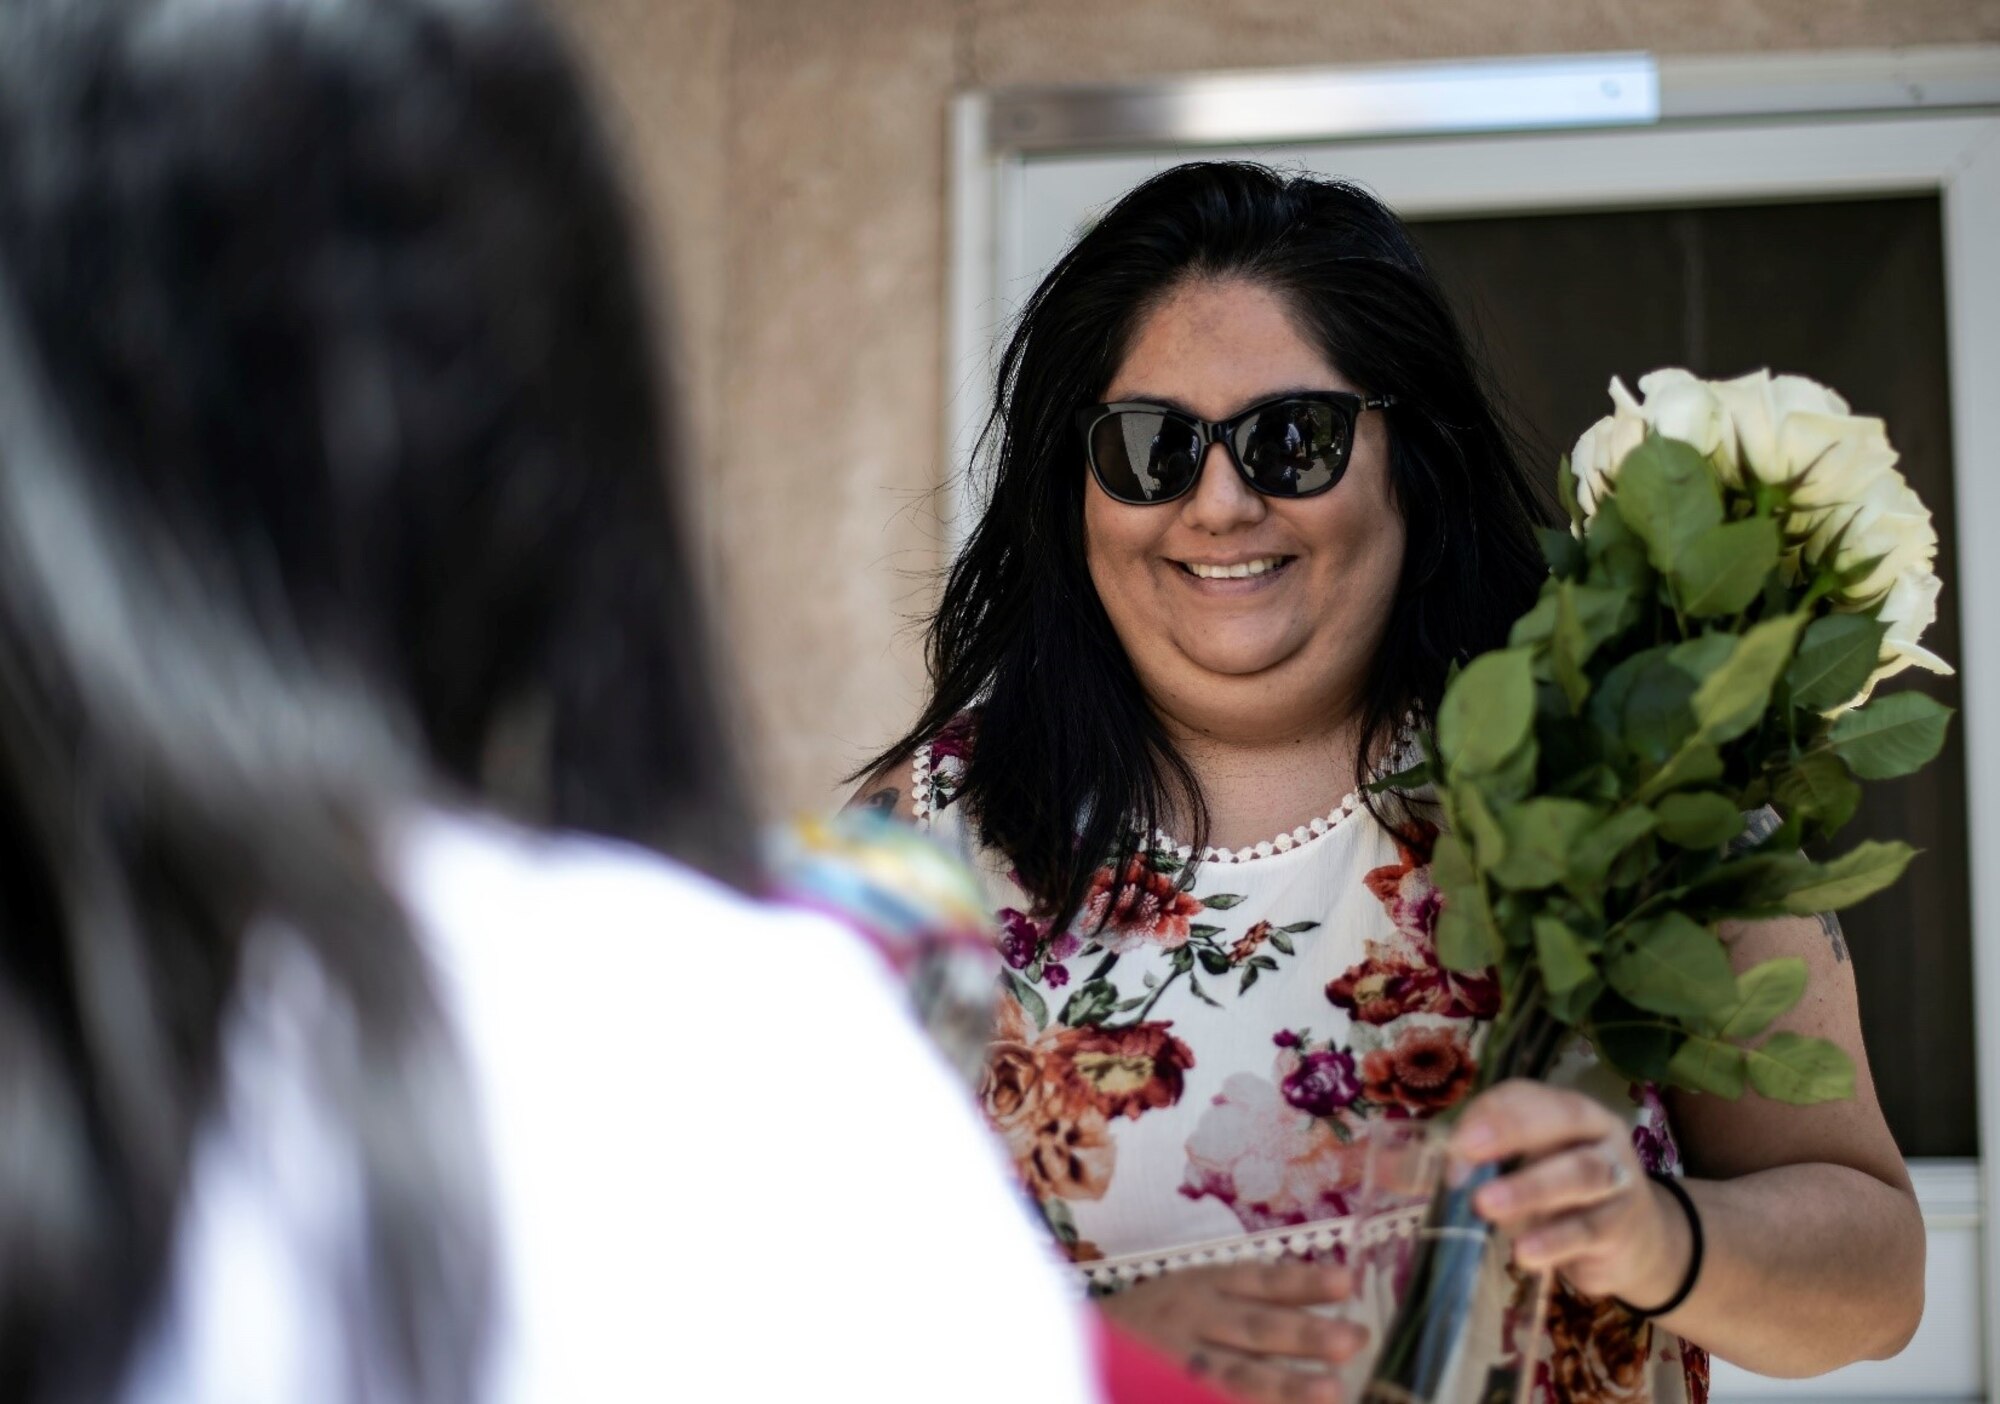 A smiling woman in sunglasses looks at another woman and holds a bouquet of flowers.